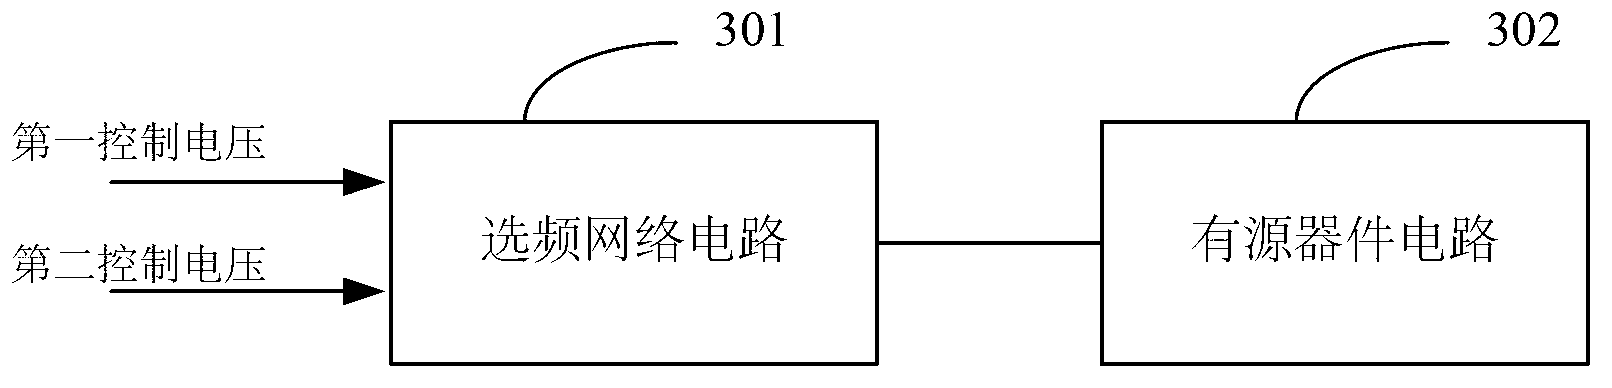 Frequency locking method, voltage-controlled oscillator and frequency generating unit